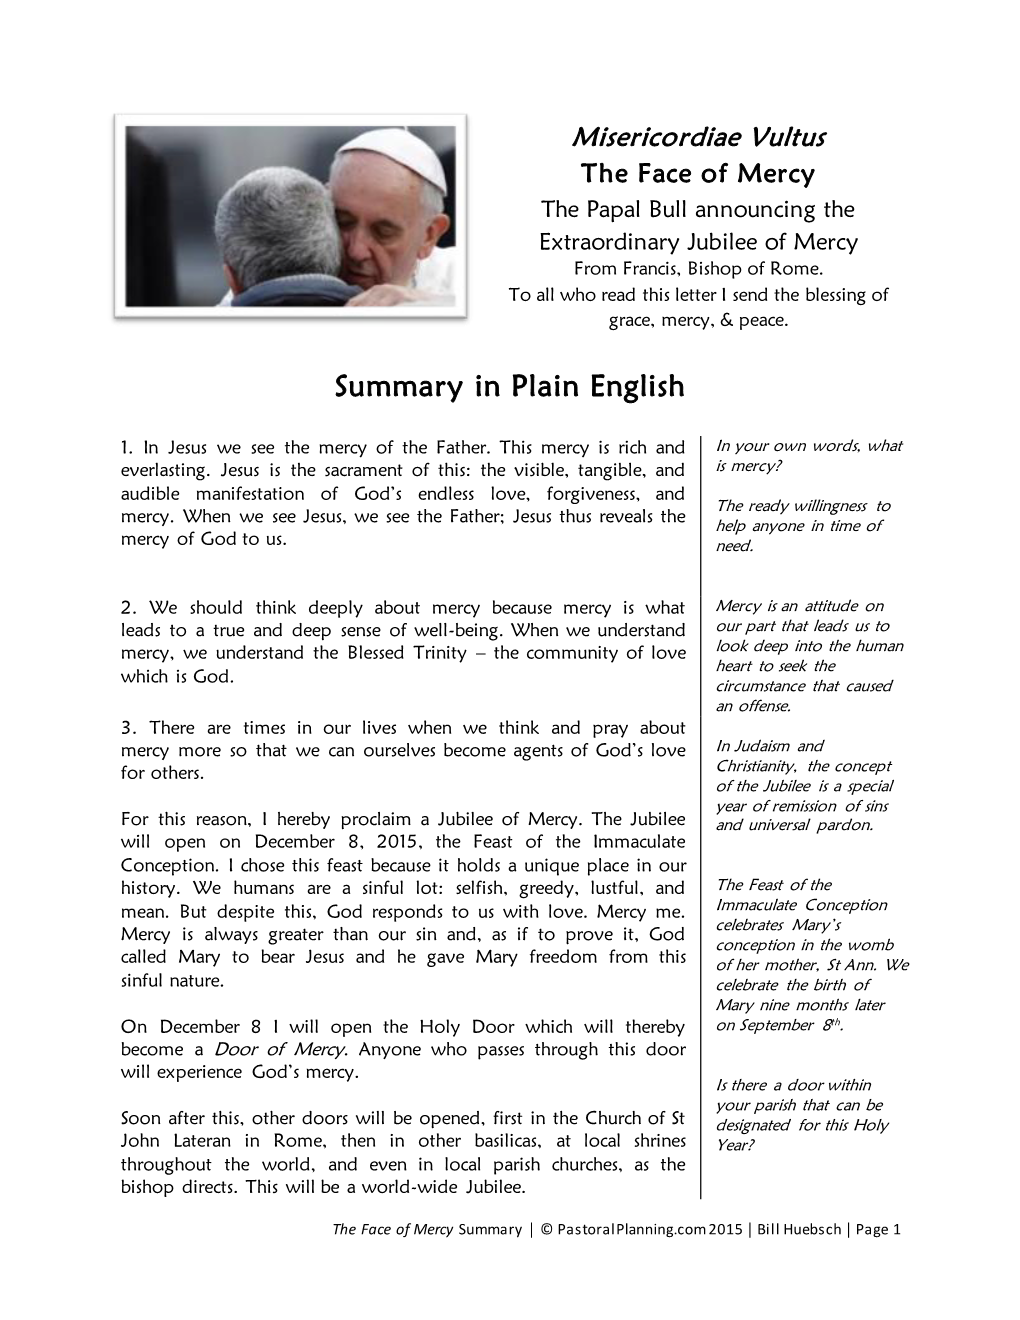 The Face of Mercy the Papal Bull Announcing the Extraordinary Jubilee of Mercy from Francis, Bishop of Rome